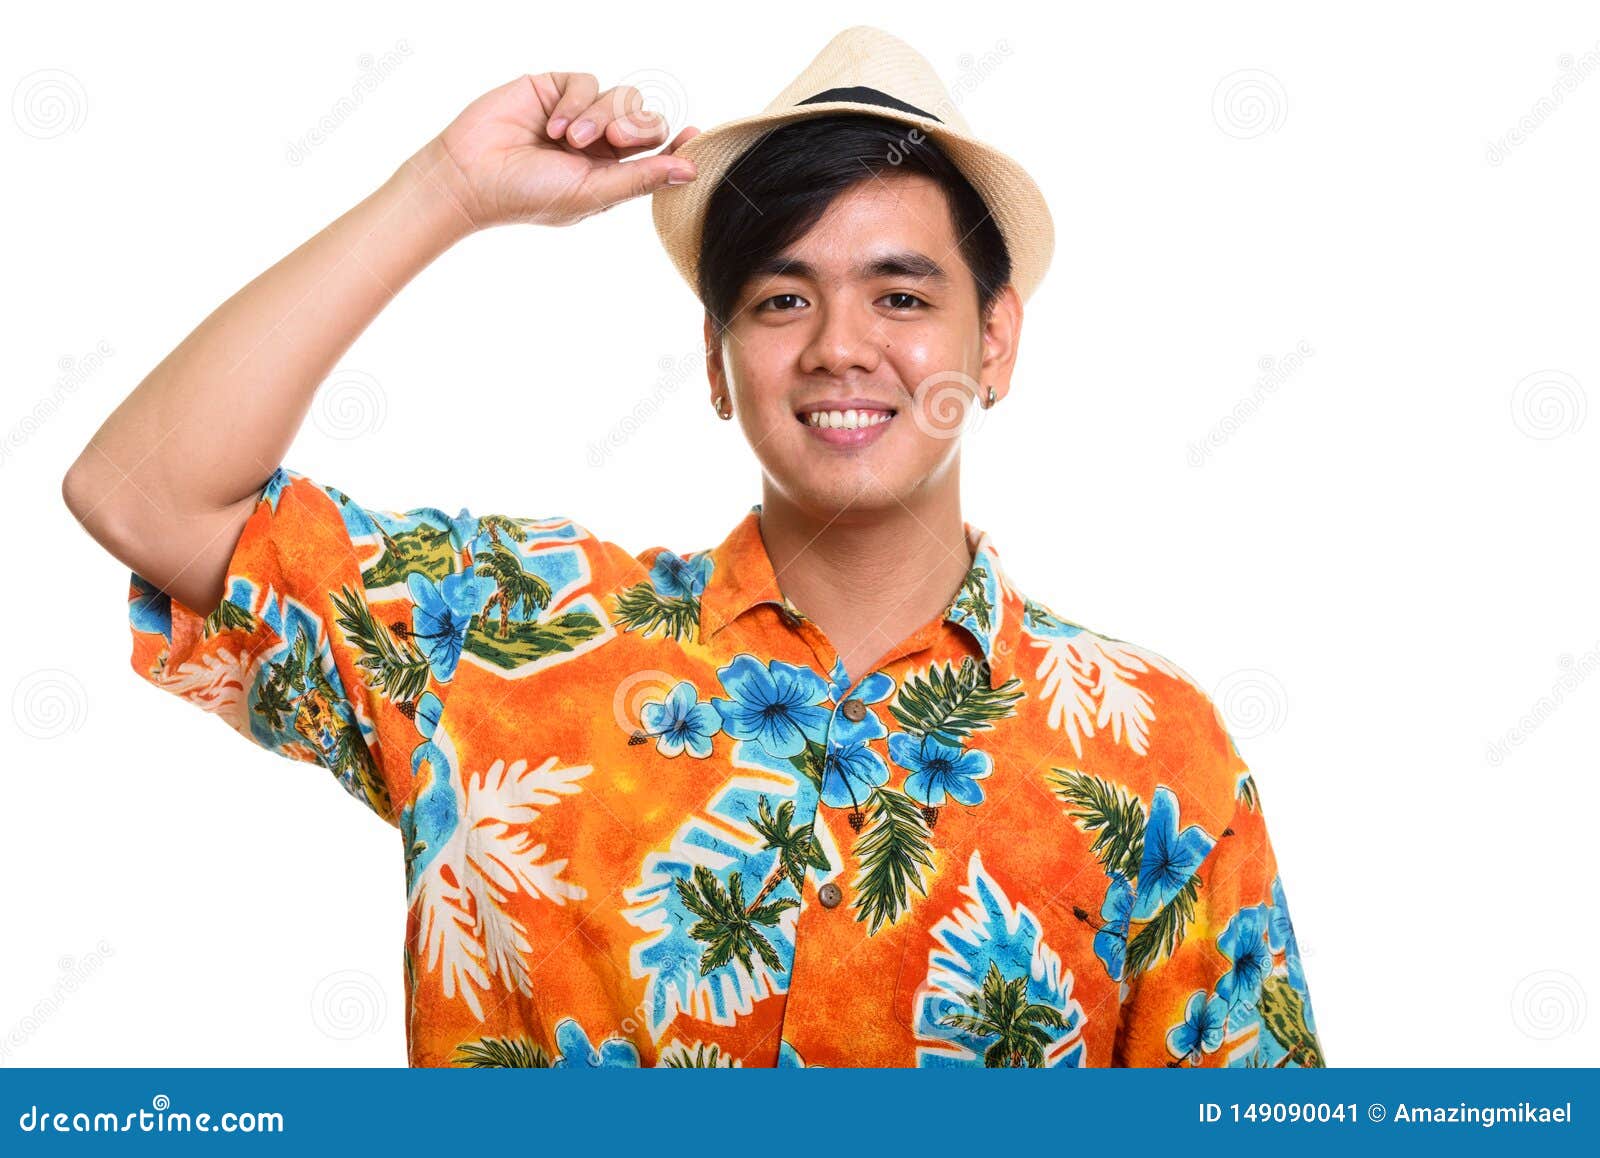 Young Happy Asian Man Smiling while Holding Hat Stock Image - Image of ...